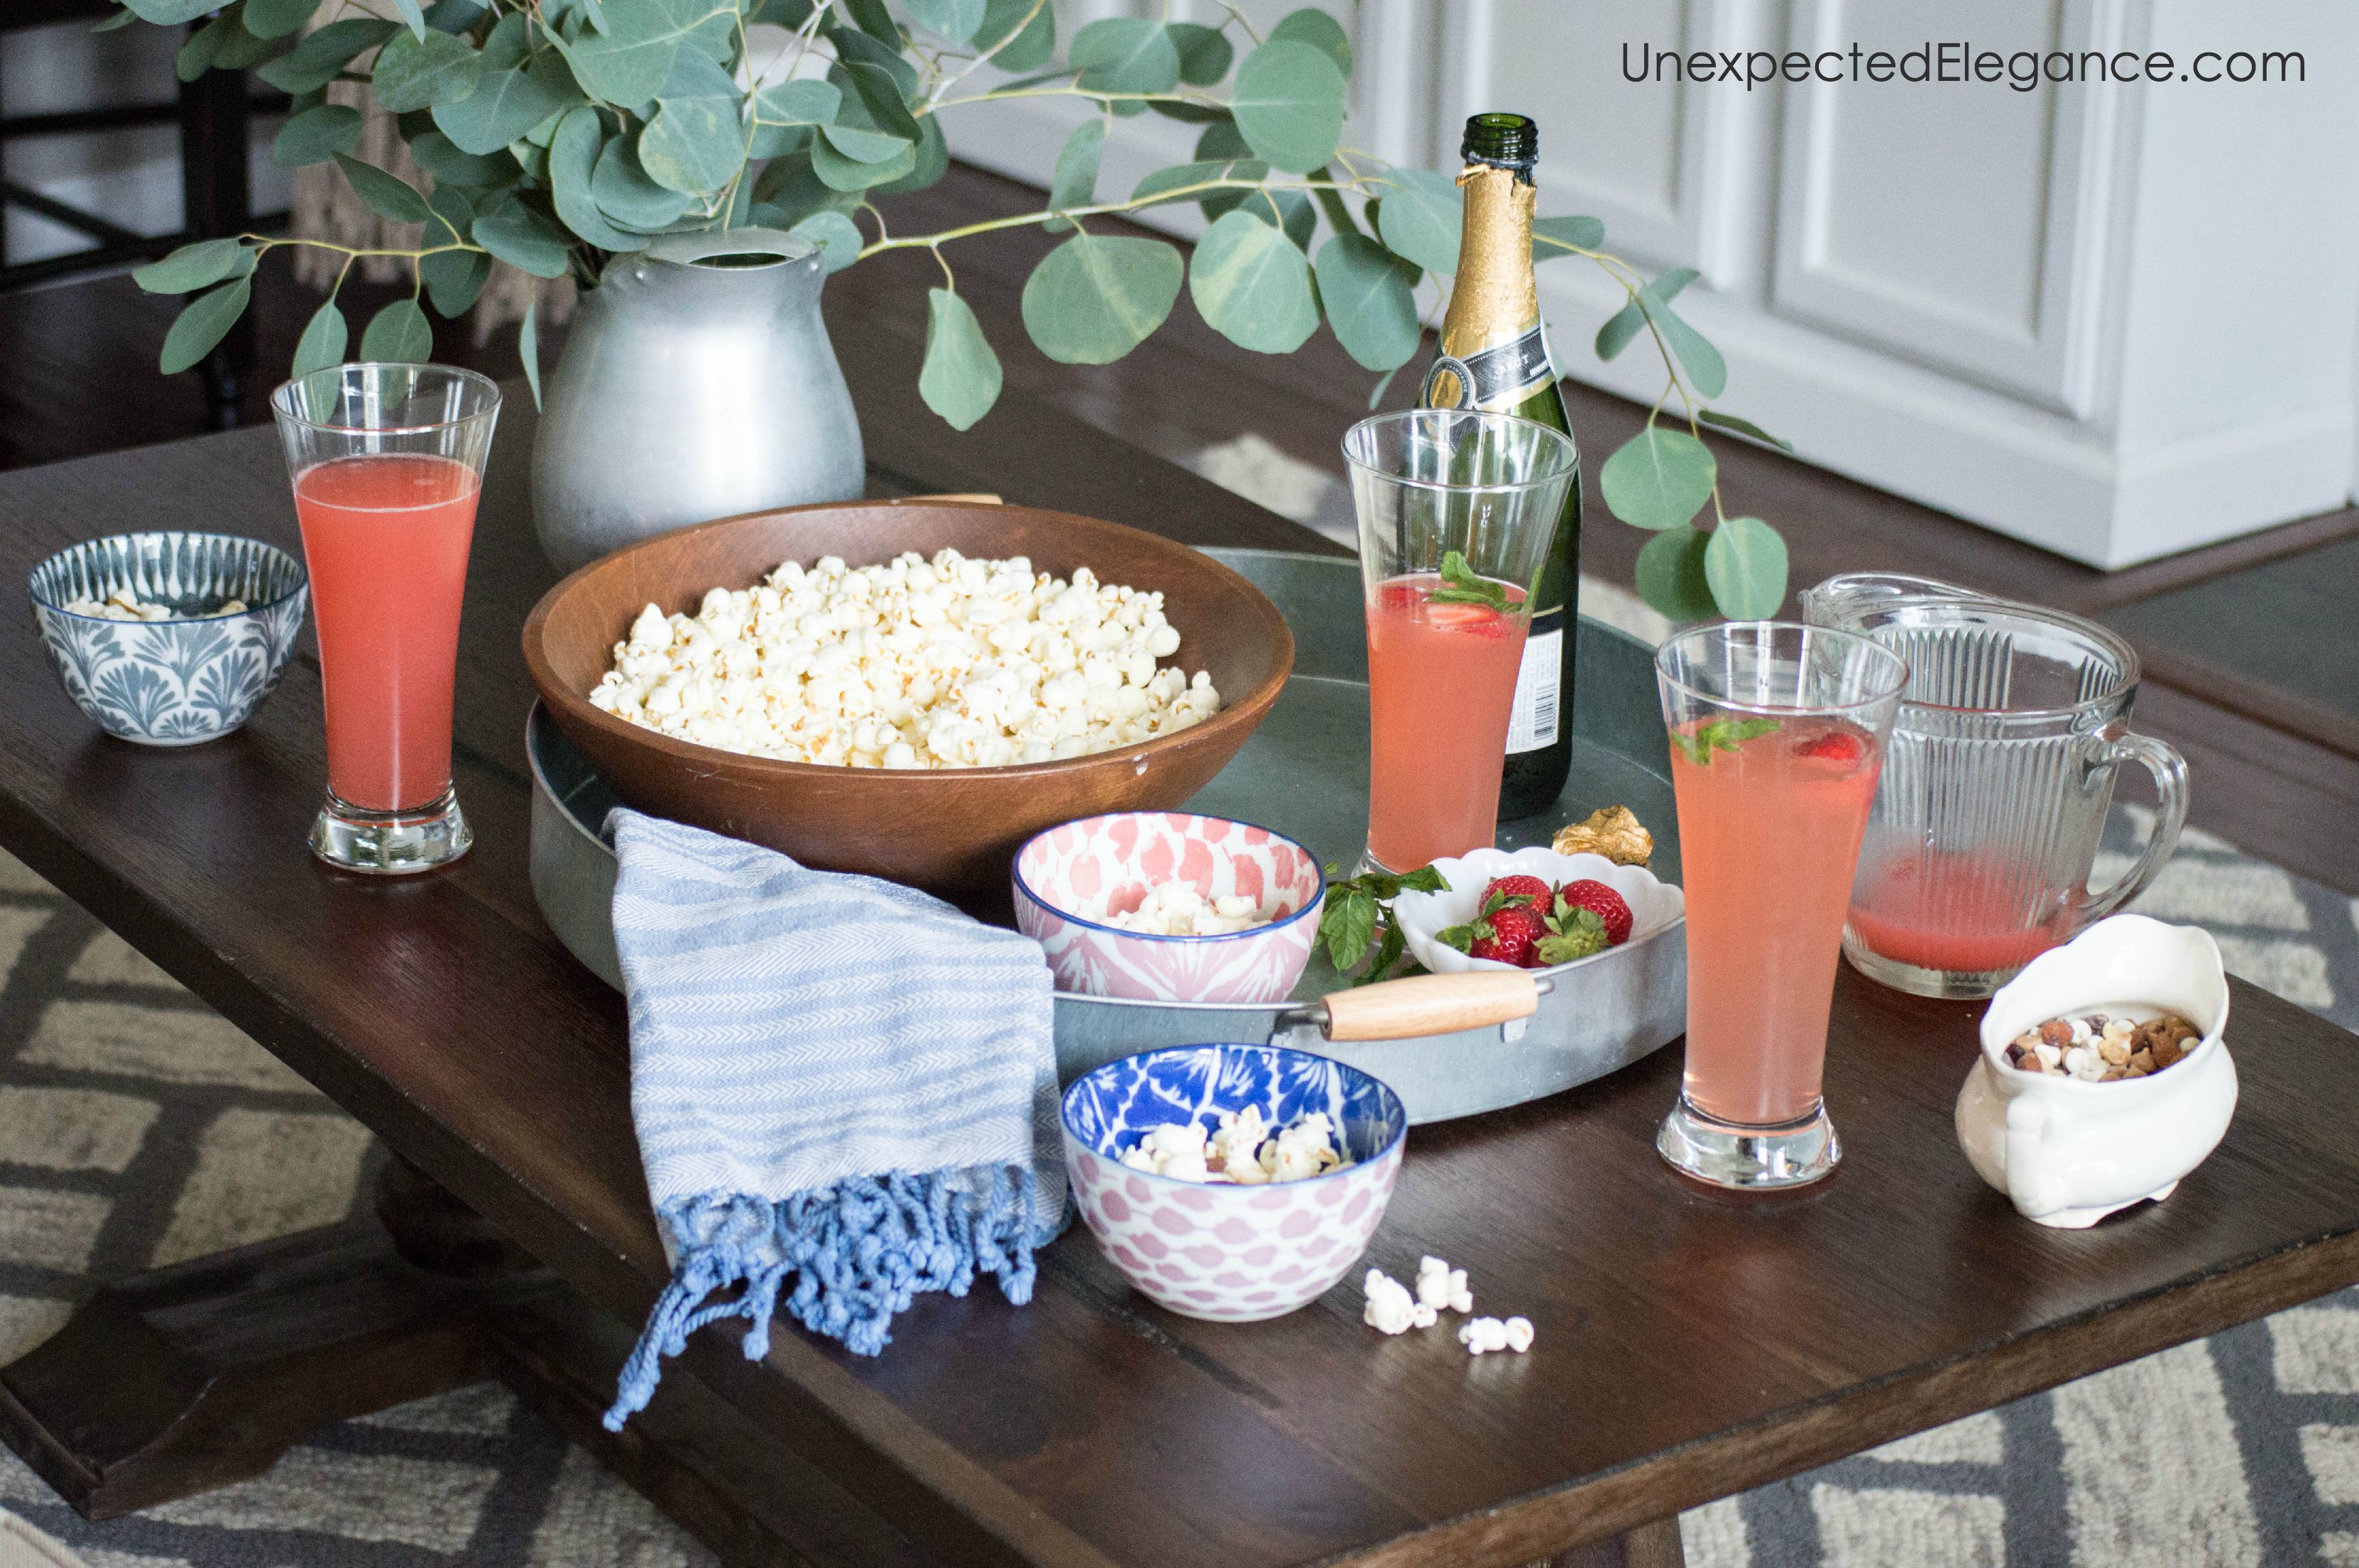 You know that feeling...you REALLY need a night out with your friends but the thought of getting dressed up is the last thing you want to do. Check out a few tips for a casual get-together with a POP of glam for the easiest entertaining ever.